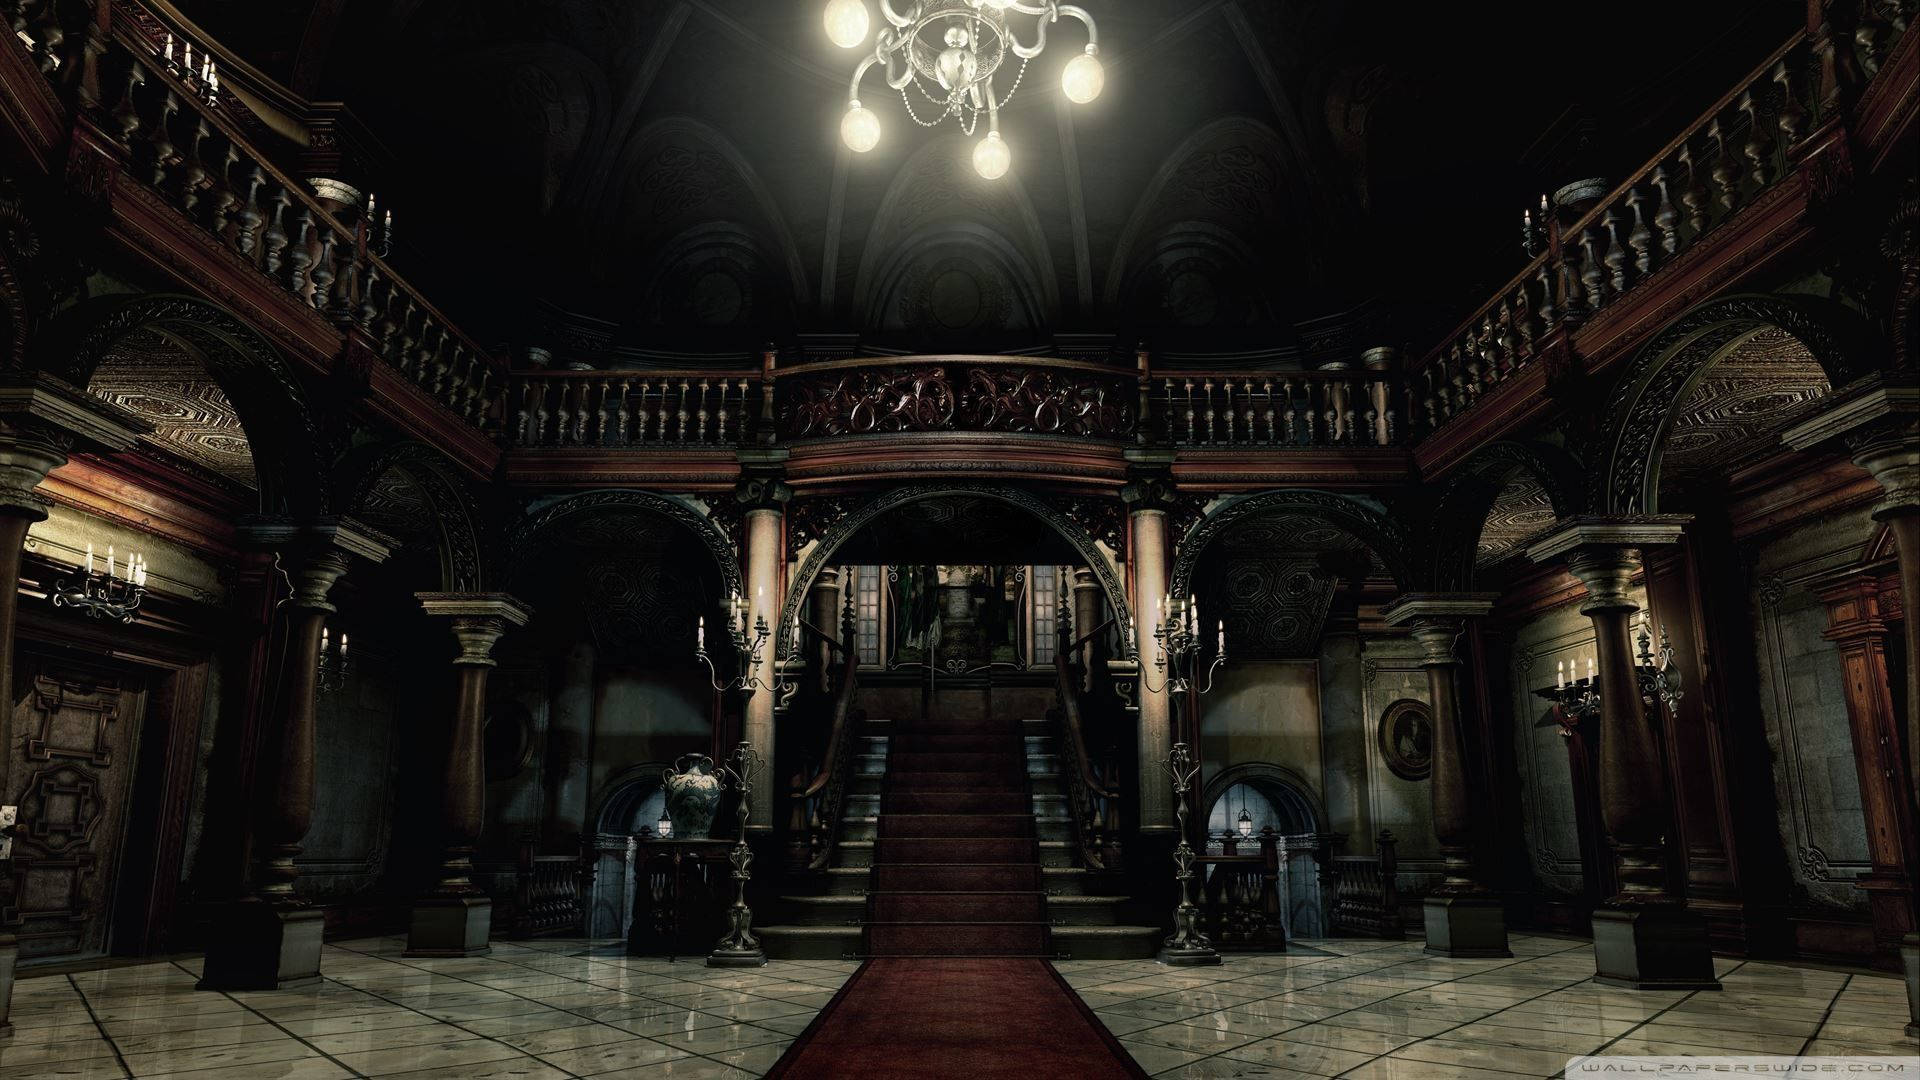 1920X1080 Resident Evil Wallpaper and Background